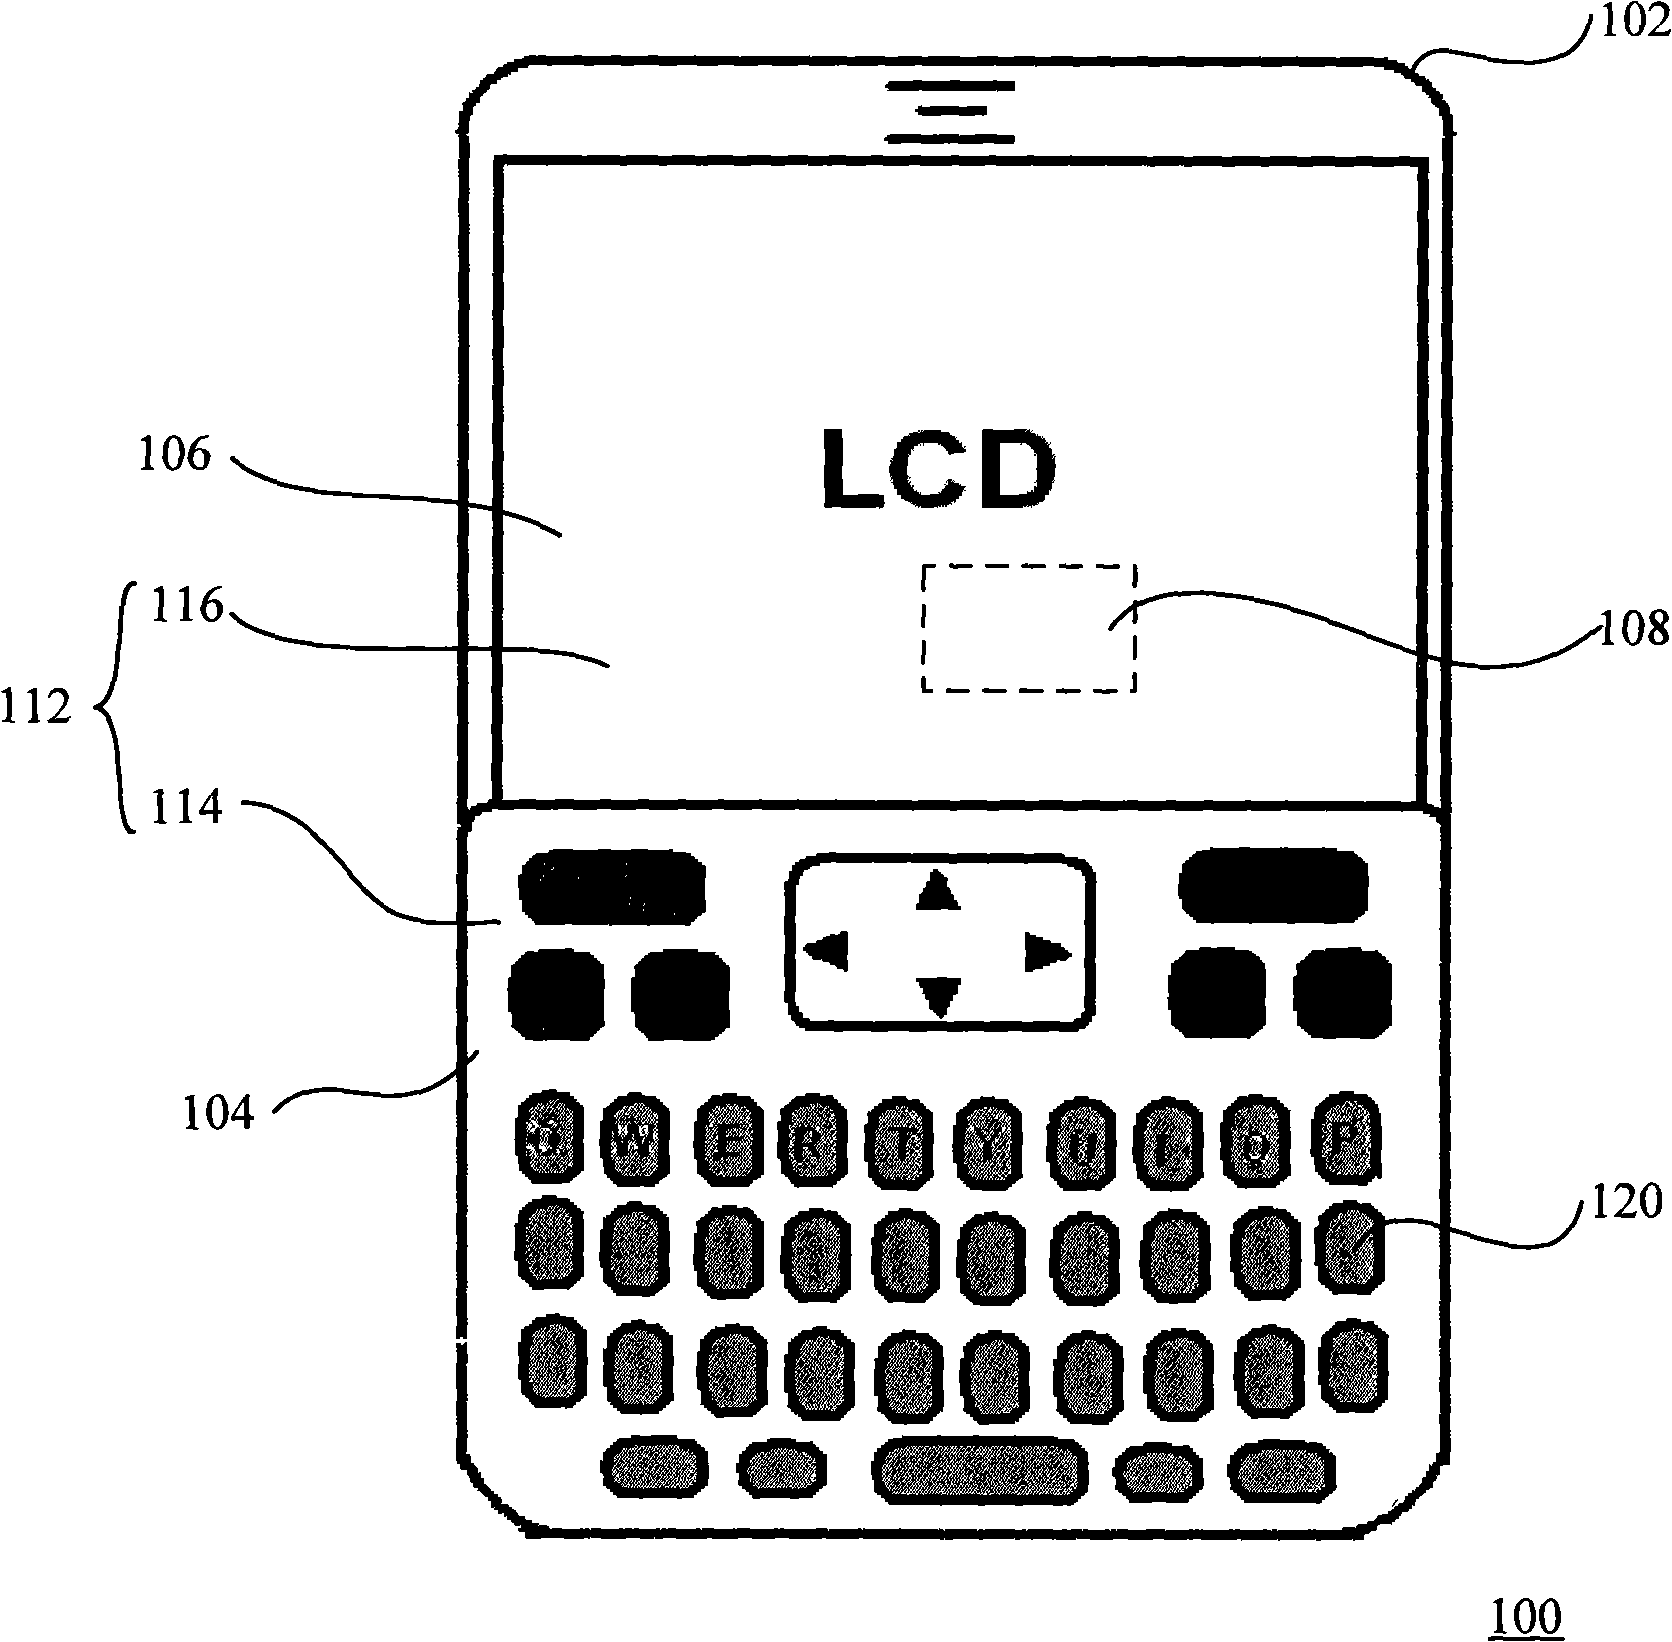 Electronic equipment with input device